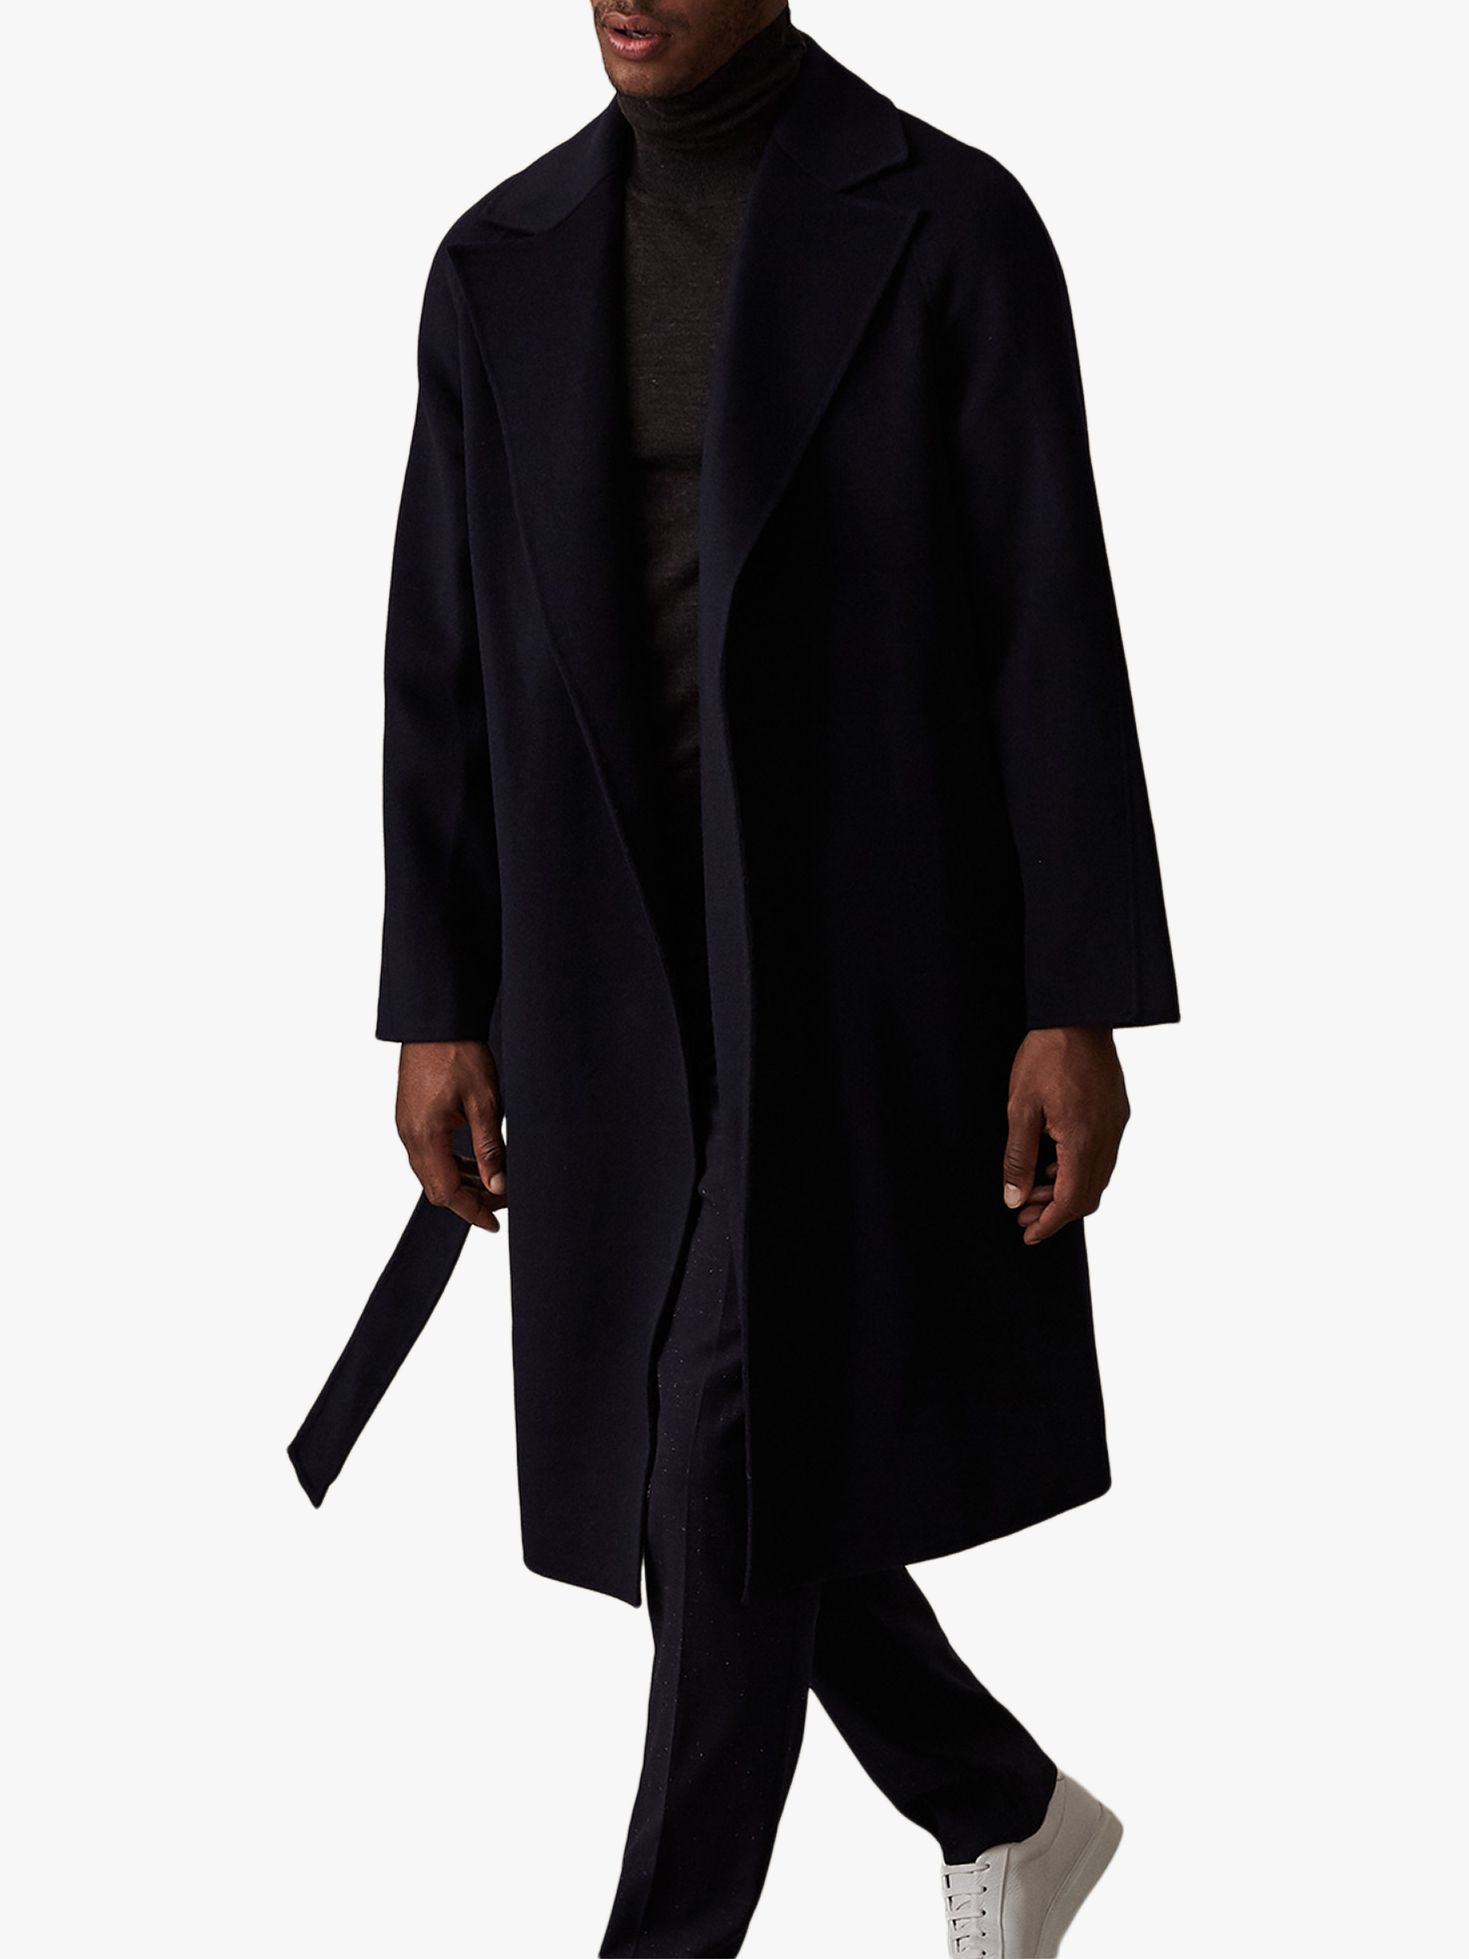 Reiss Vincent Belted Wool Coat, Navy at John Lewis & Partners